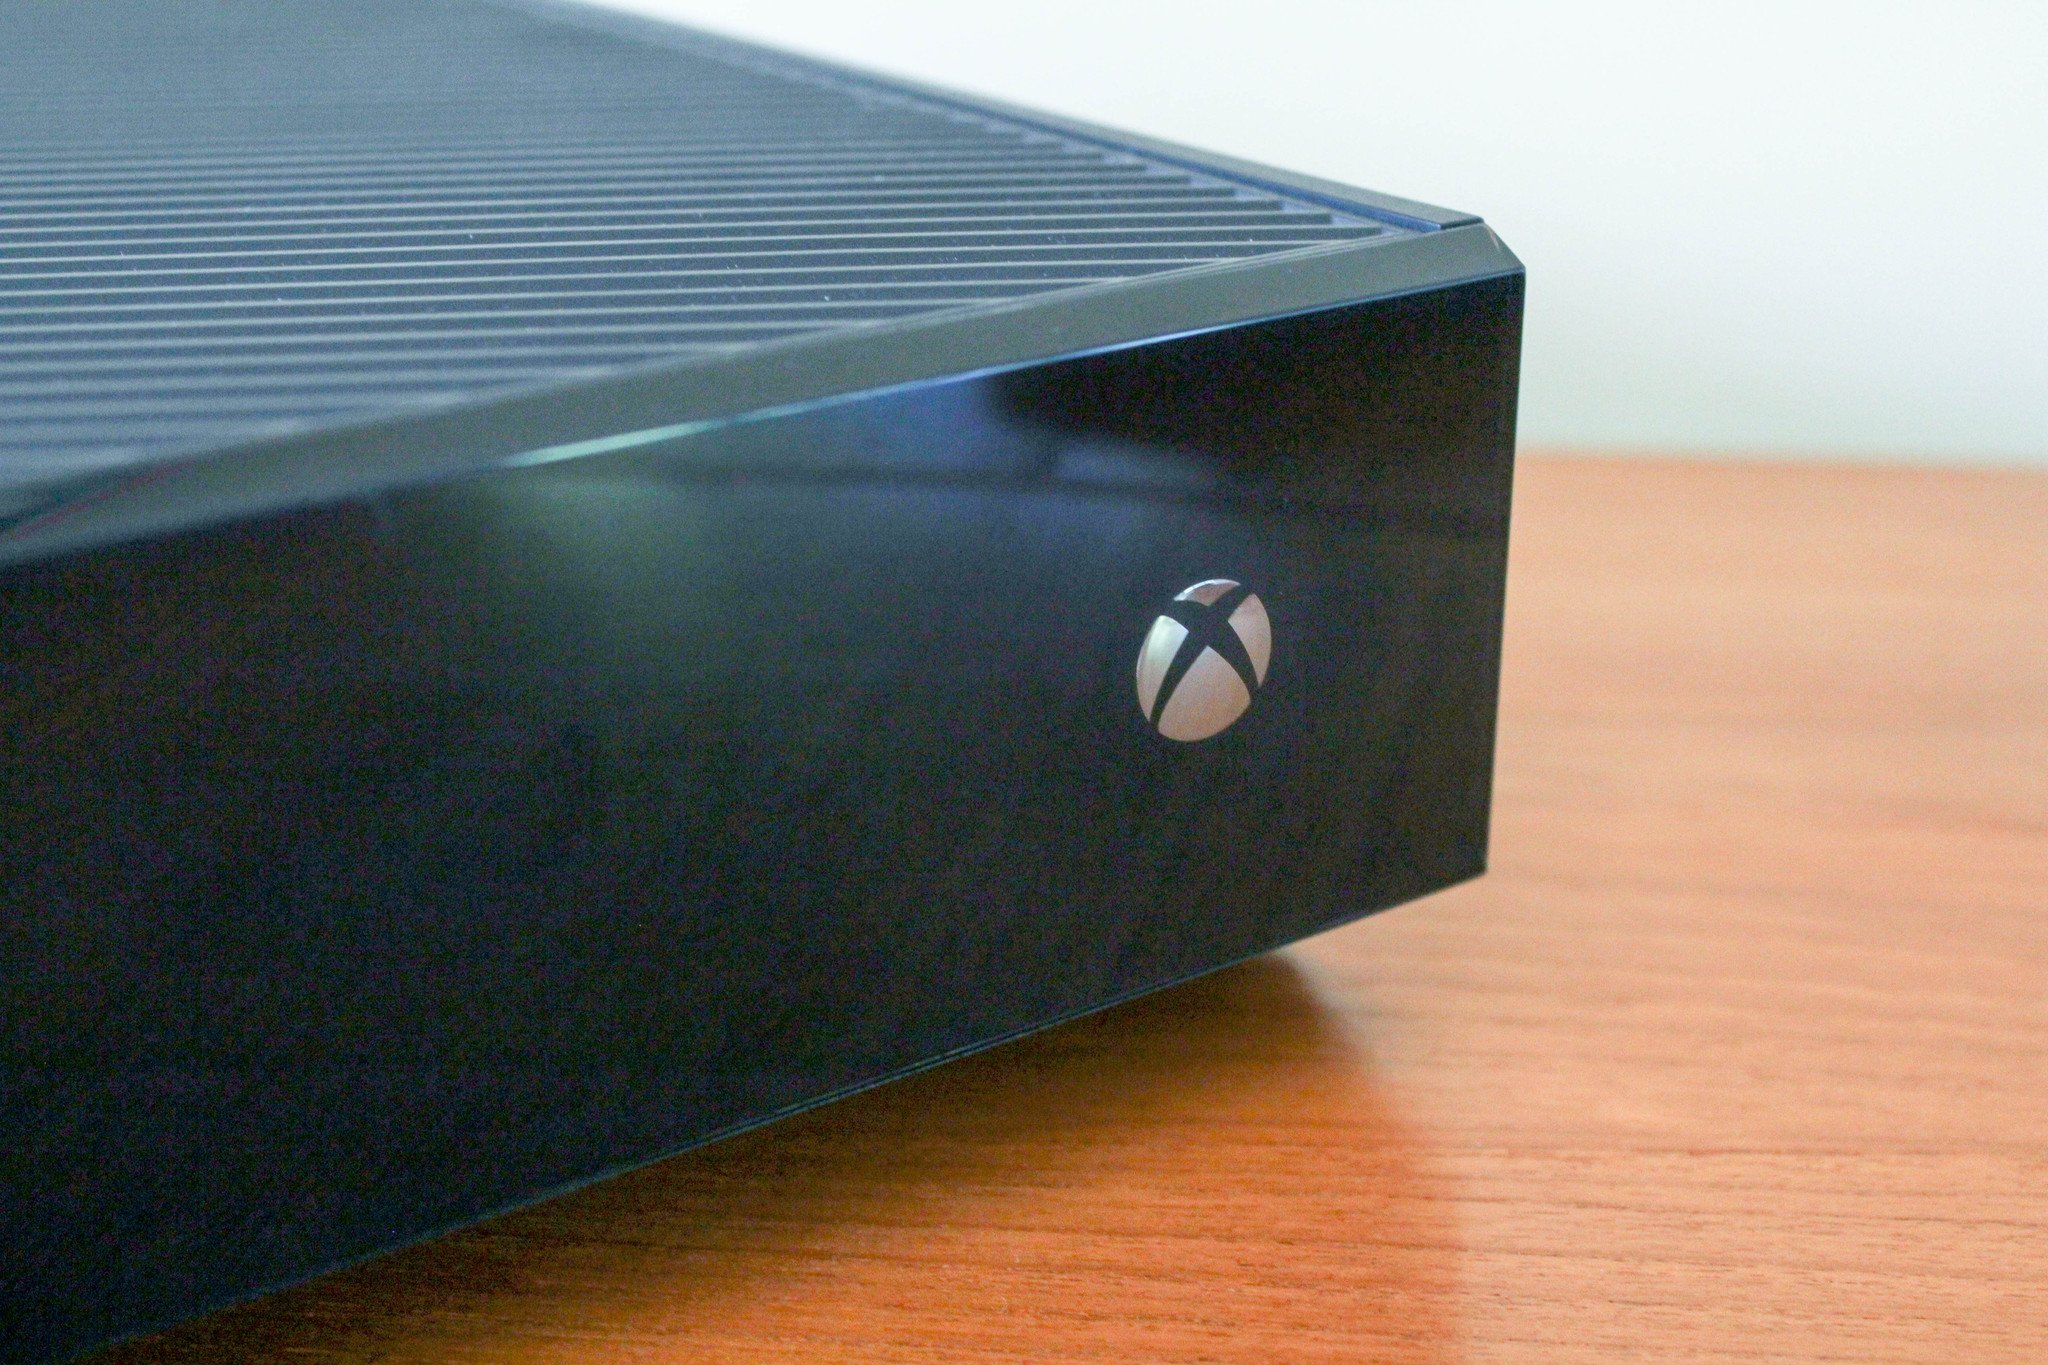 xbox-one-front.jpg